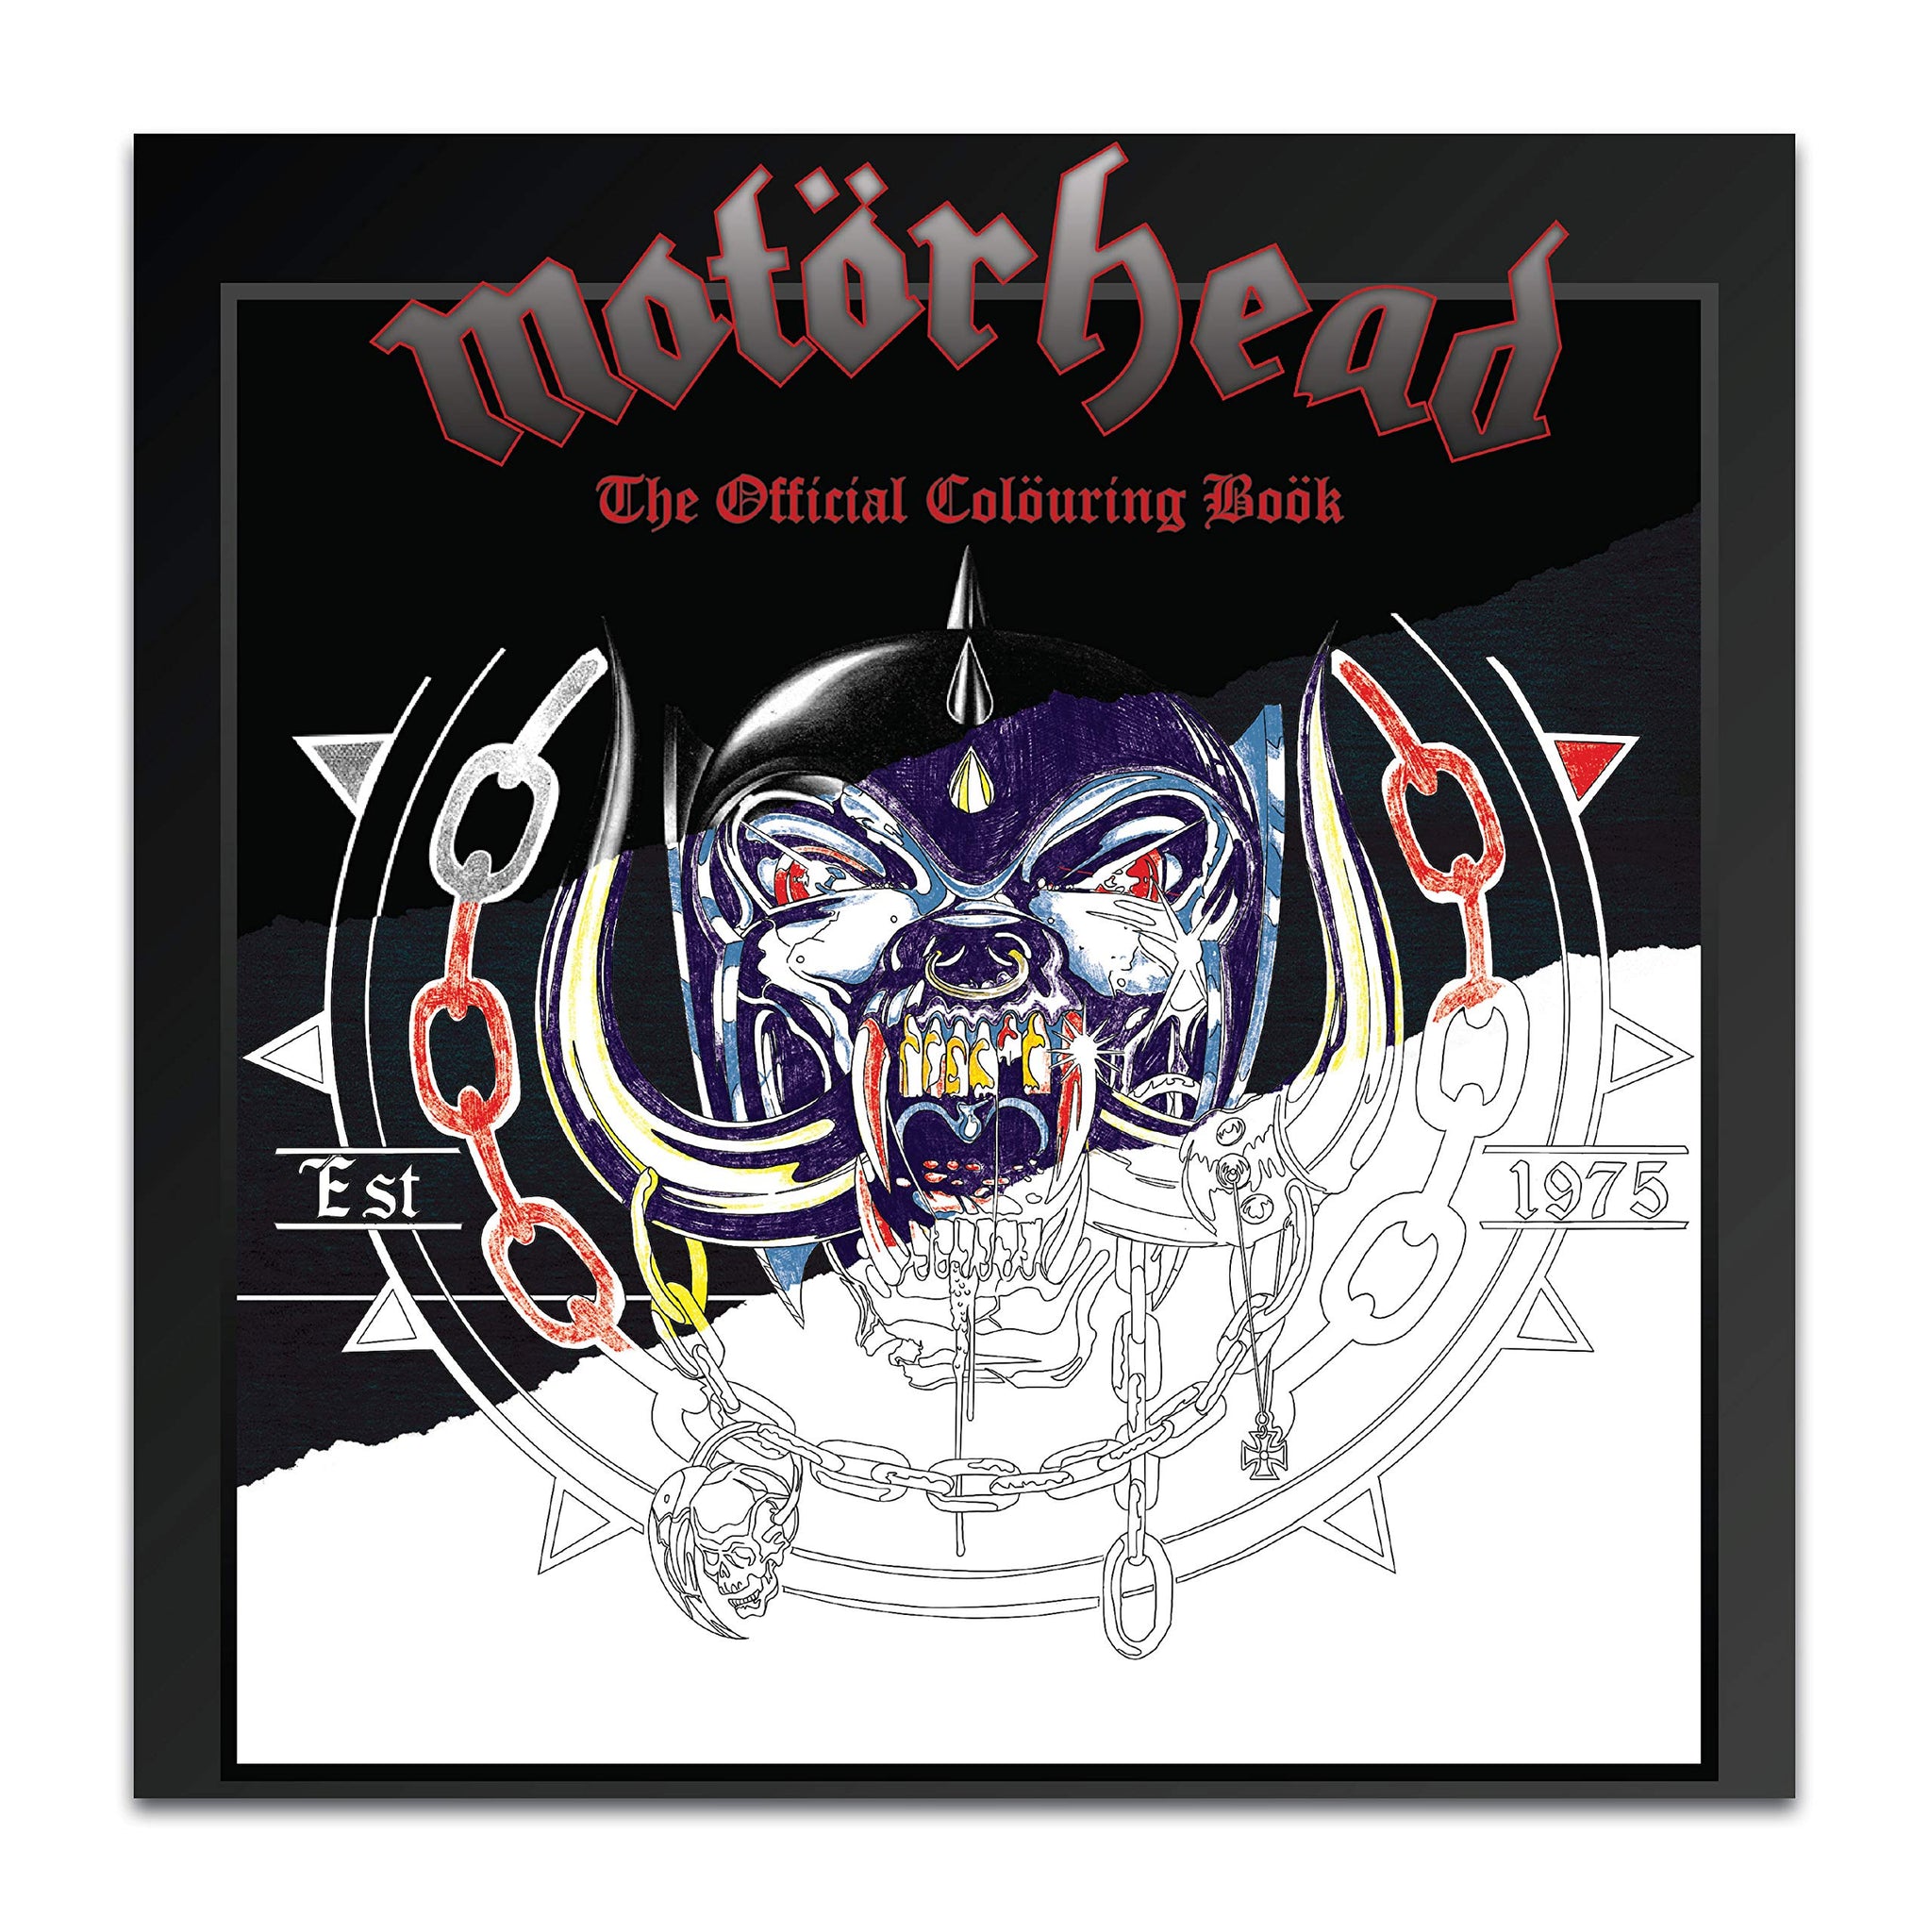 Motorhead: The Official Colouring Book